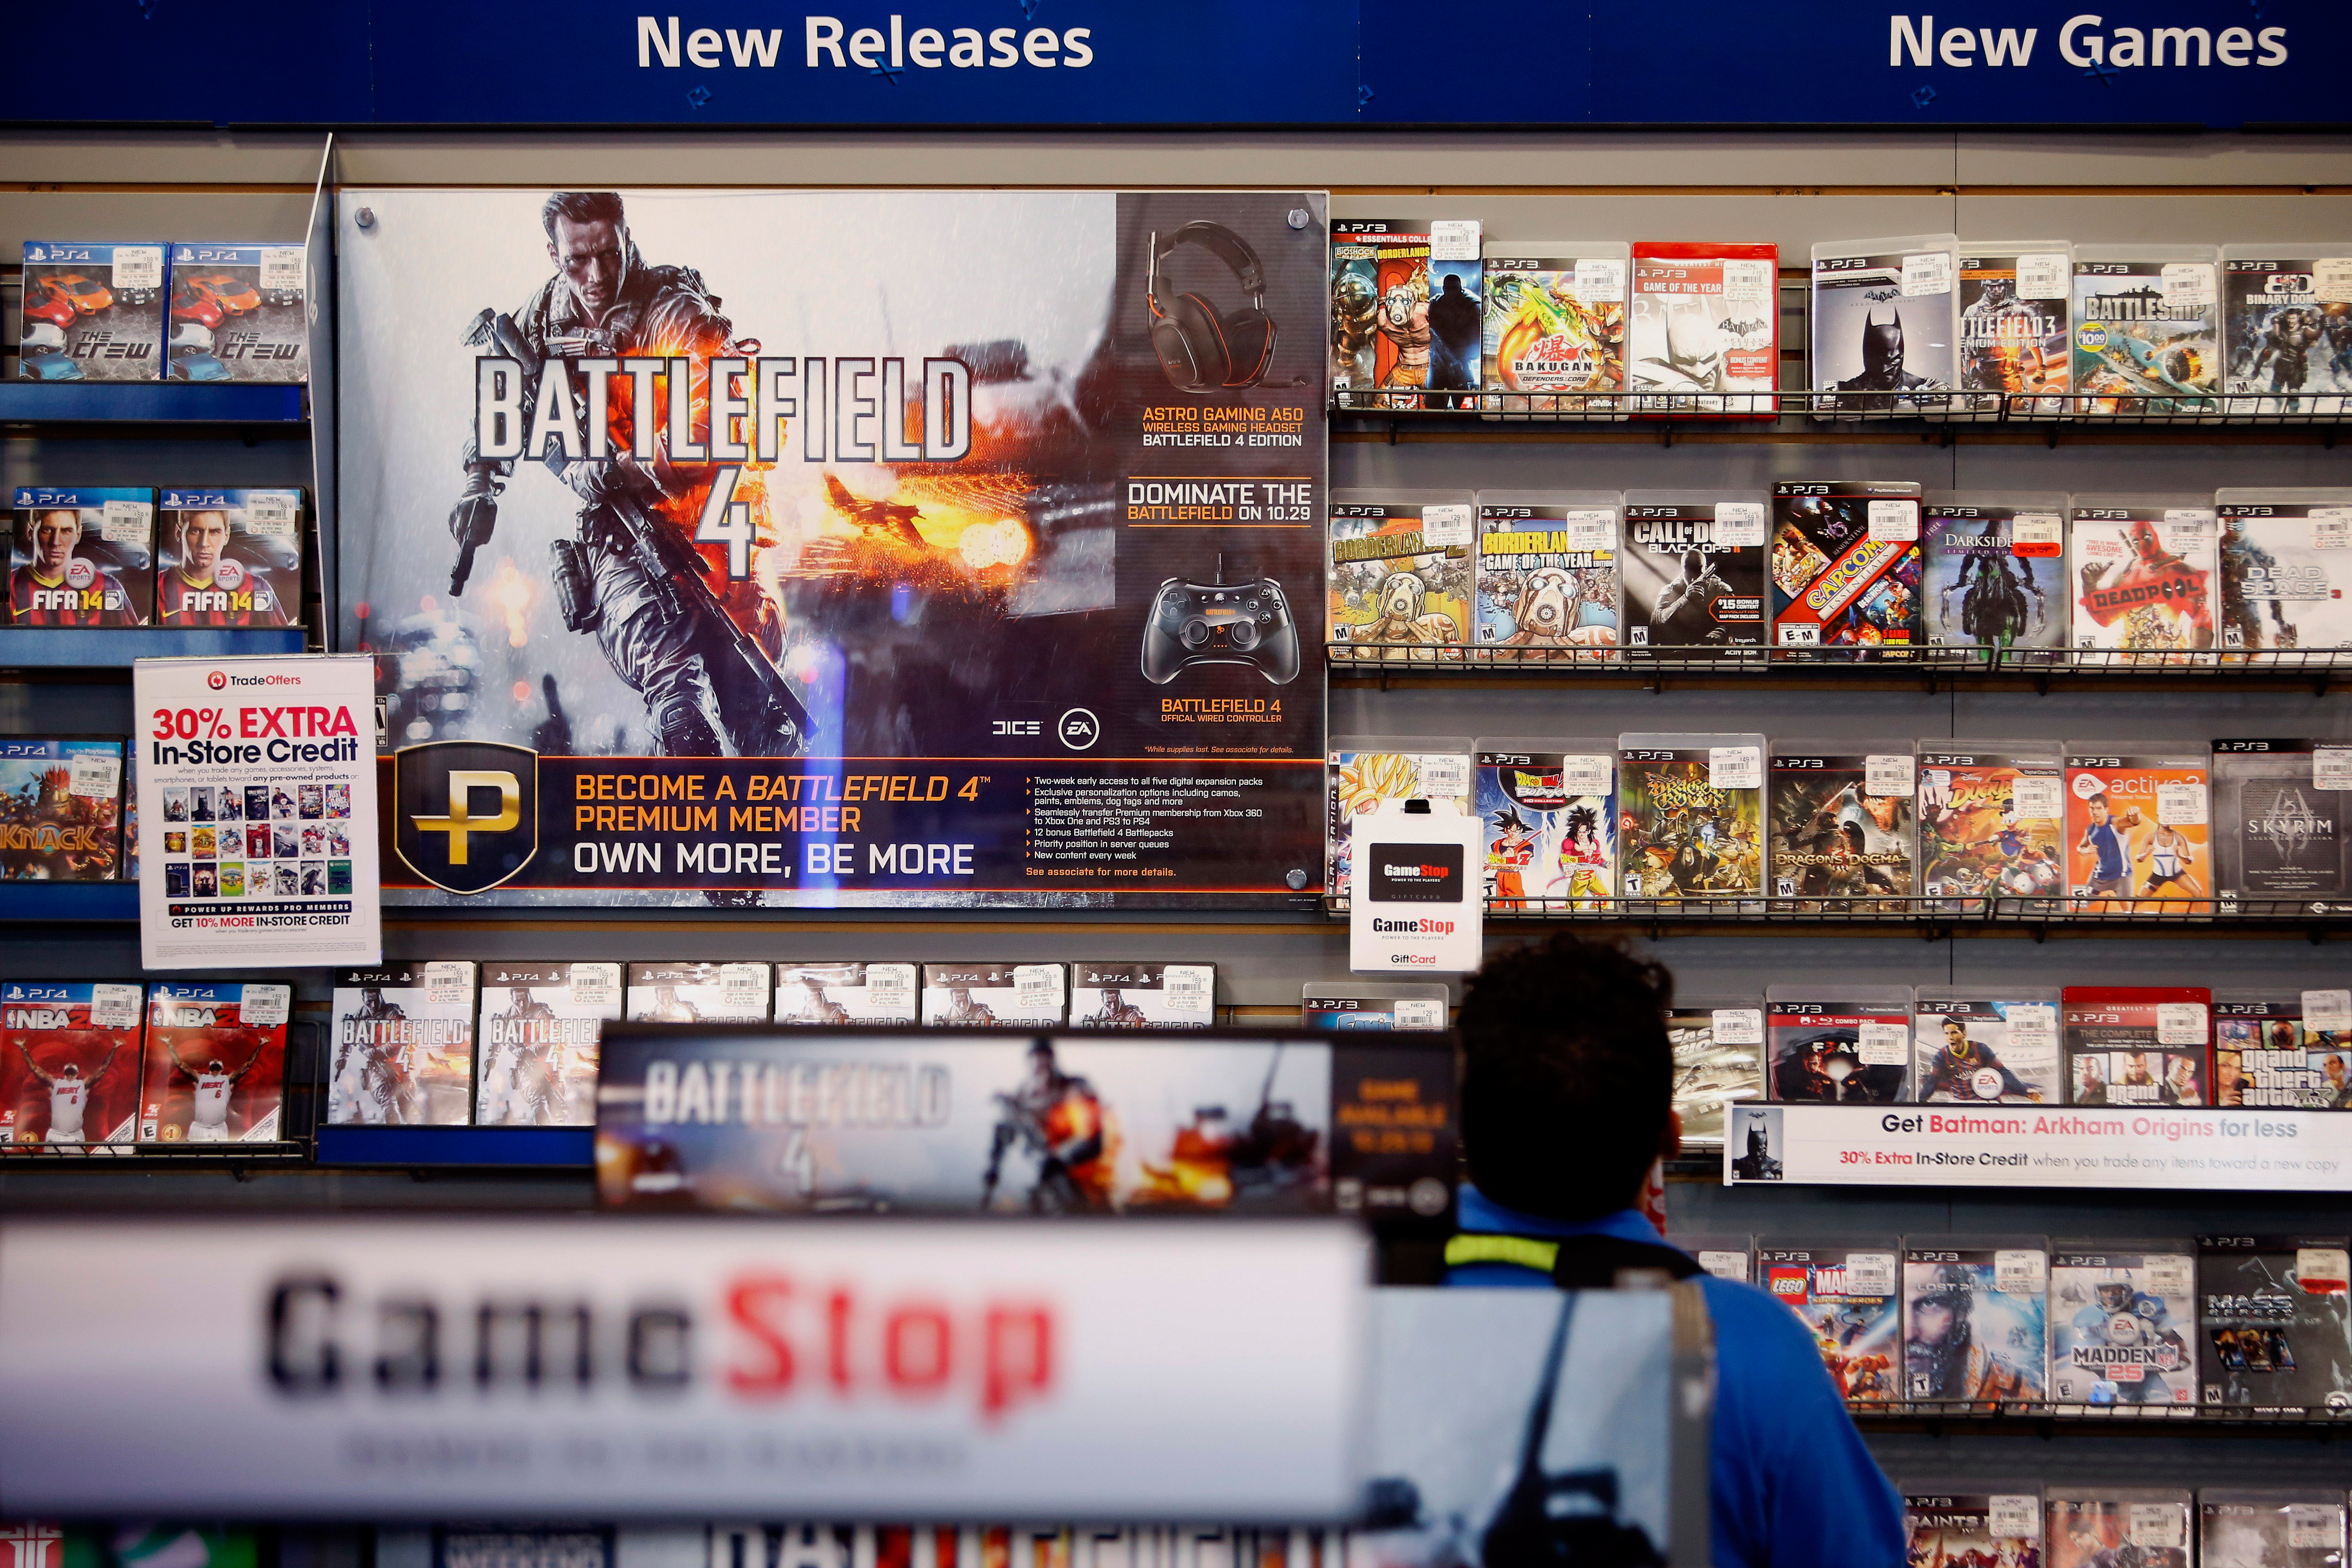 An Electronic Arts Inc. Battlefield 4 video game advertisement is displayed as a customer browses at a GameStop Corp. store in West Hollywood, California, U.S.